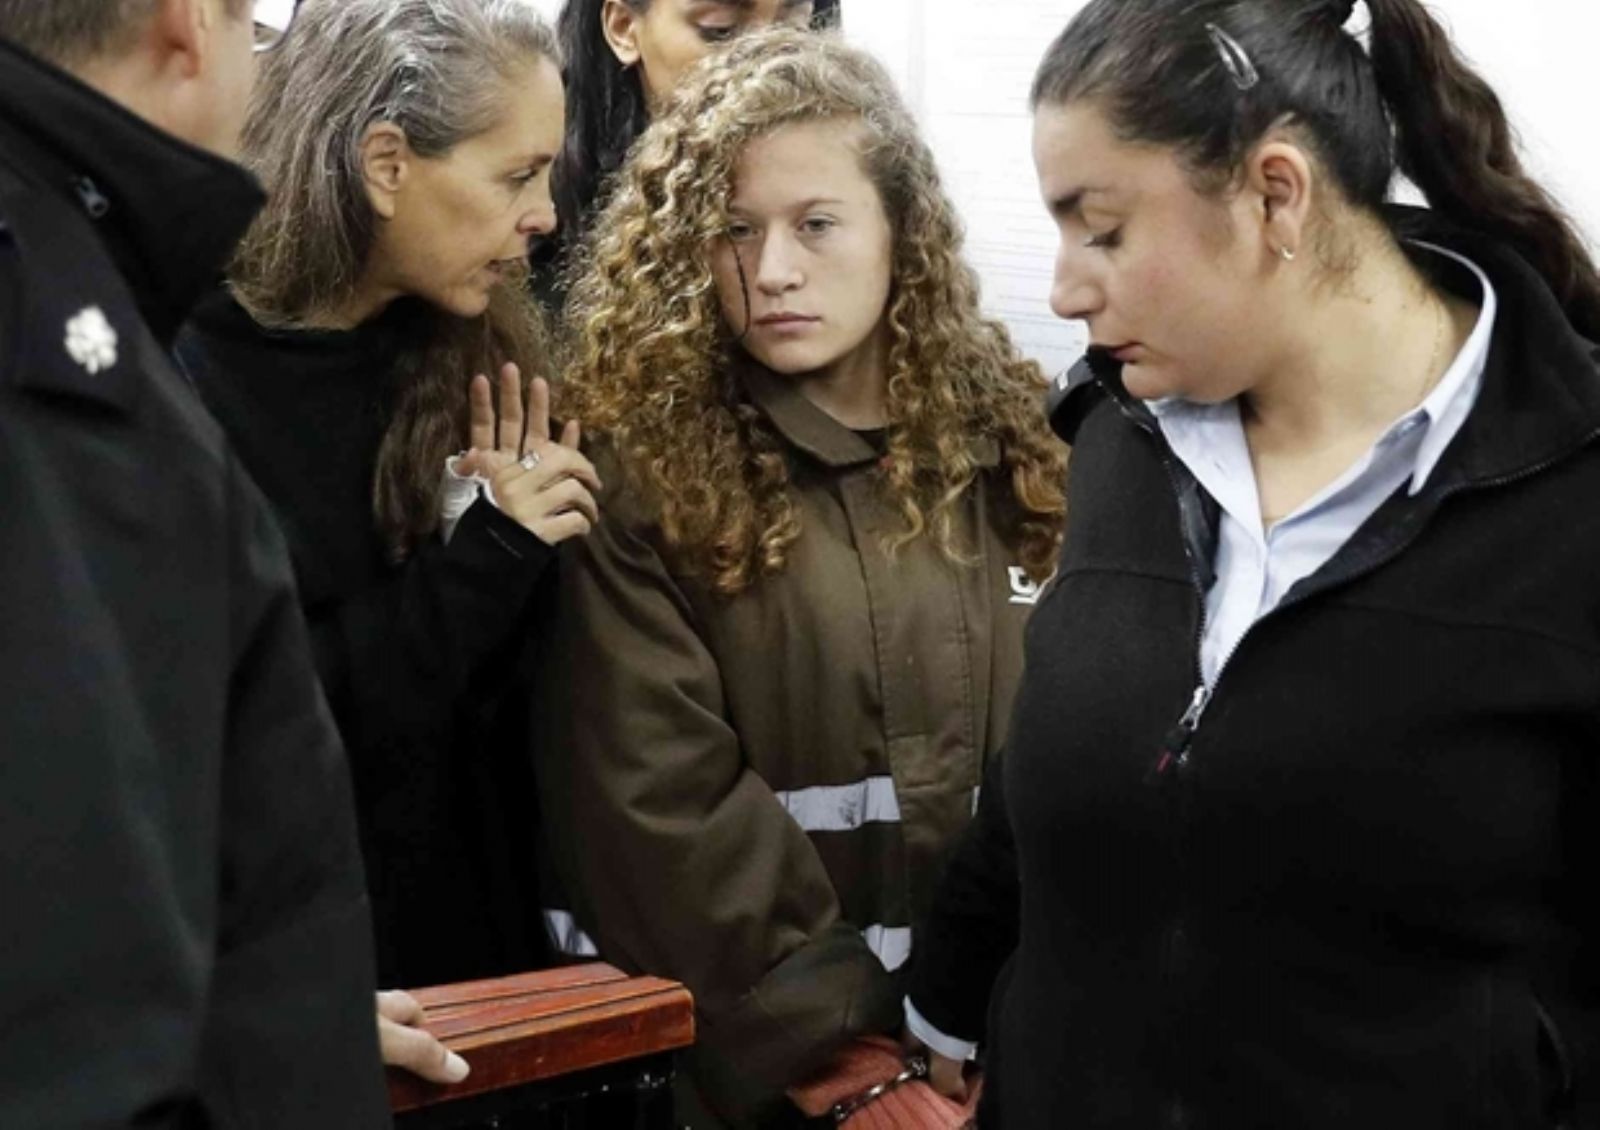 Video shows interrogation of Ahed Tamimi without a lawyer